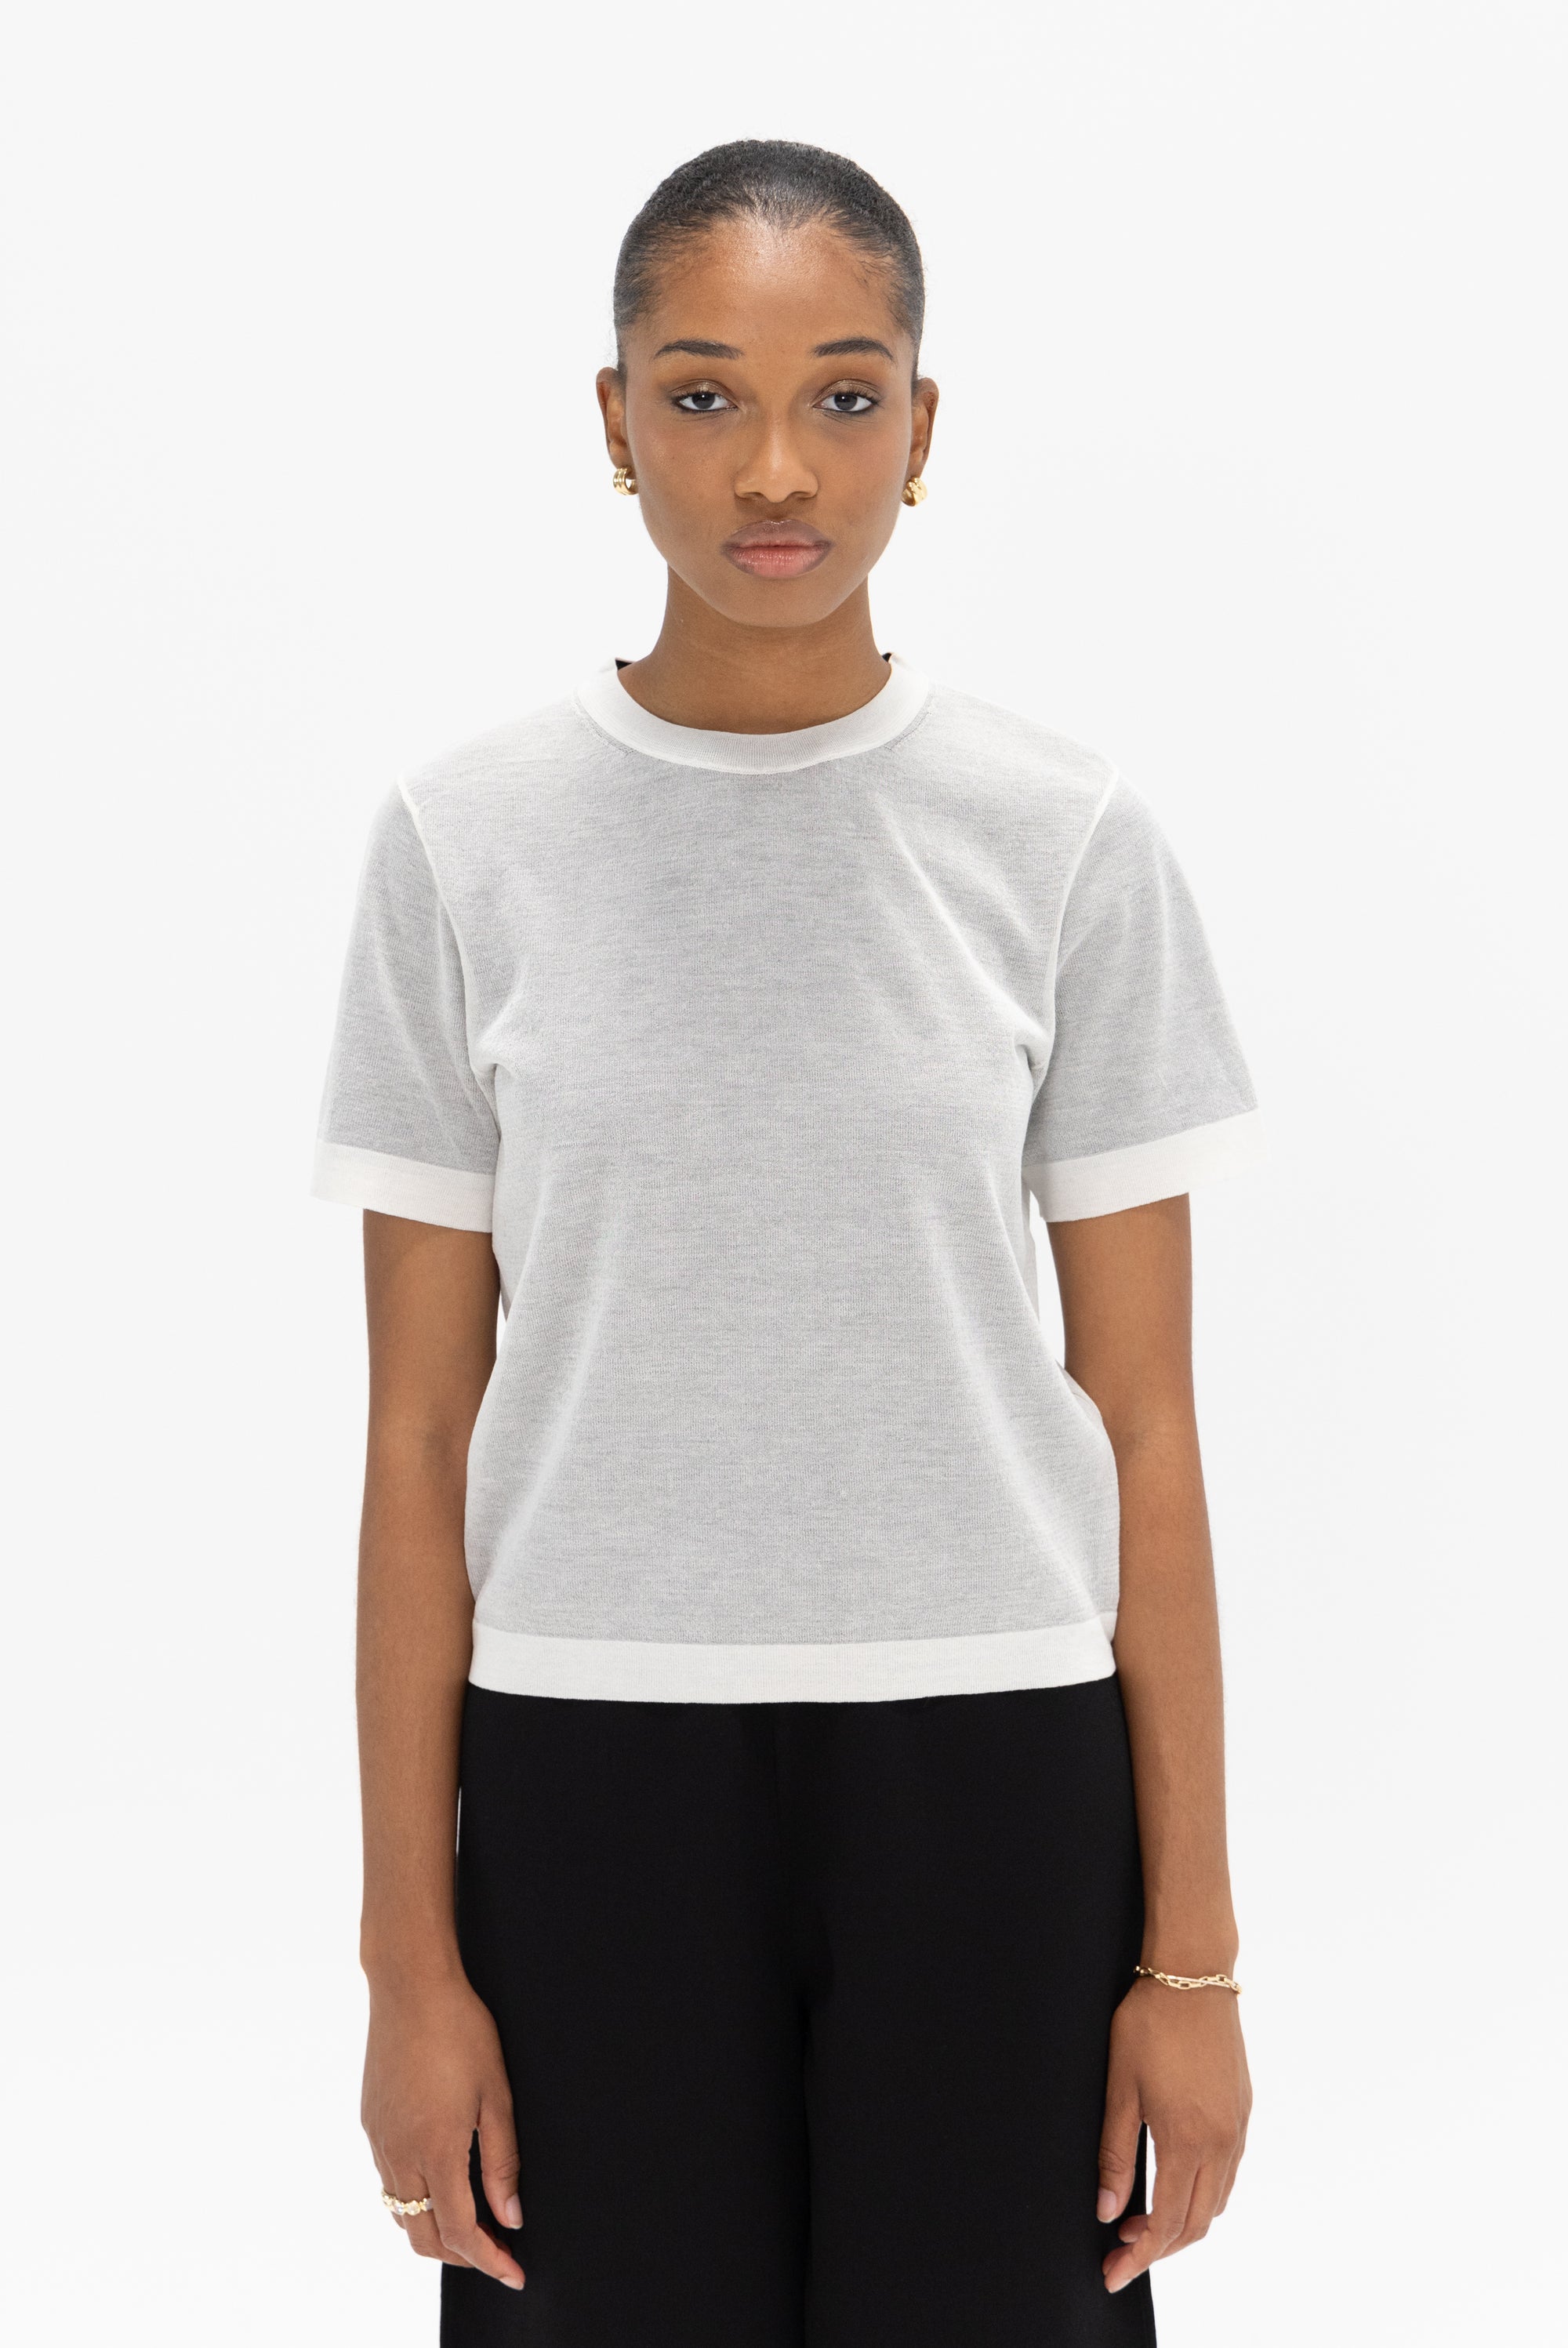 PROENZA SCHOULER WHITE LABEL - Powell Sheer Knit Top, Off-White and Black